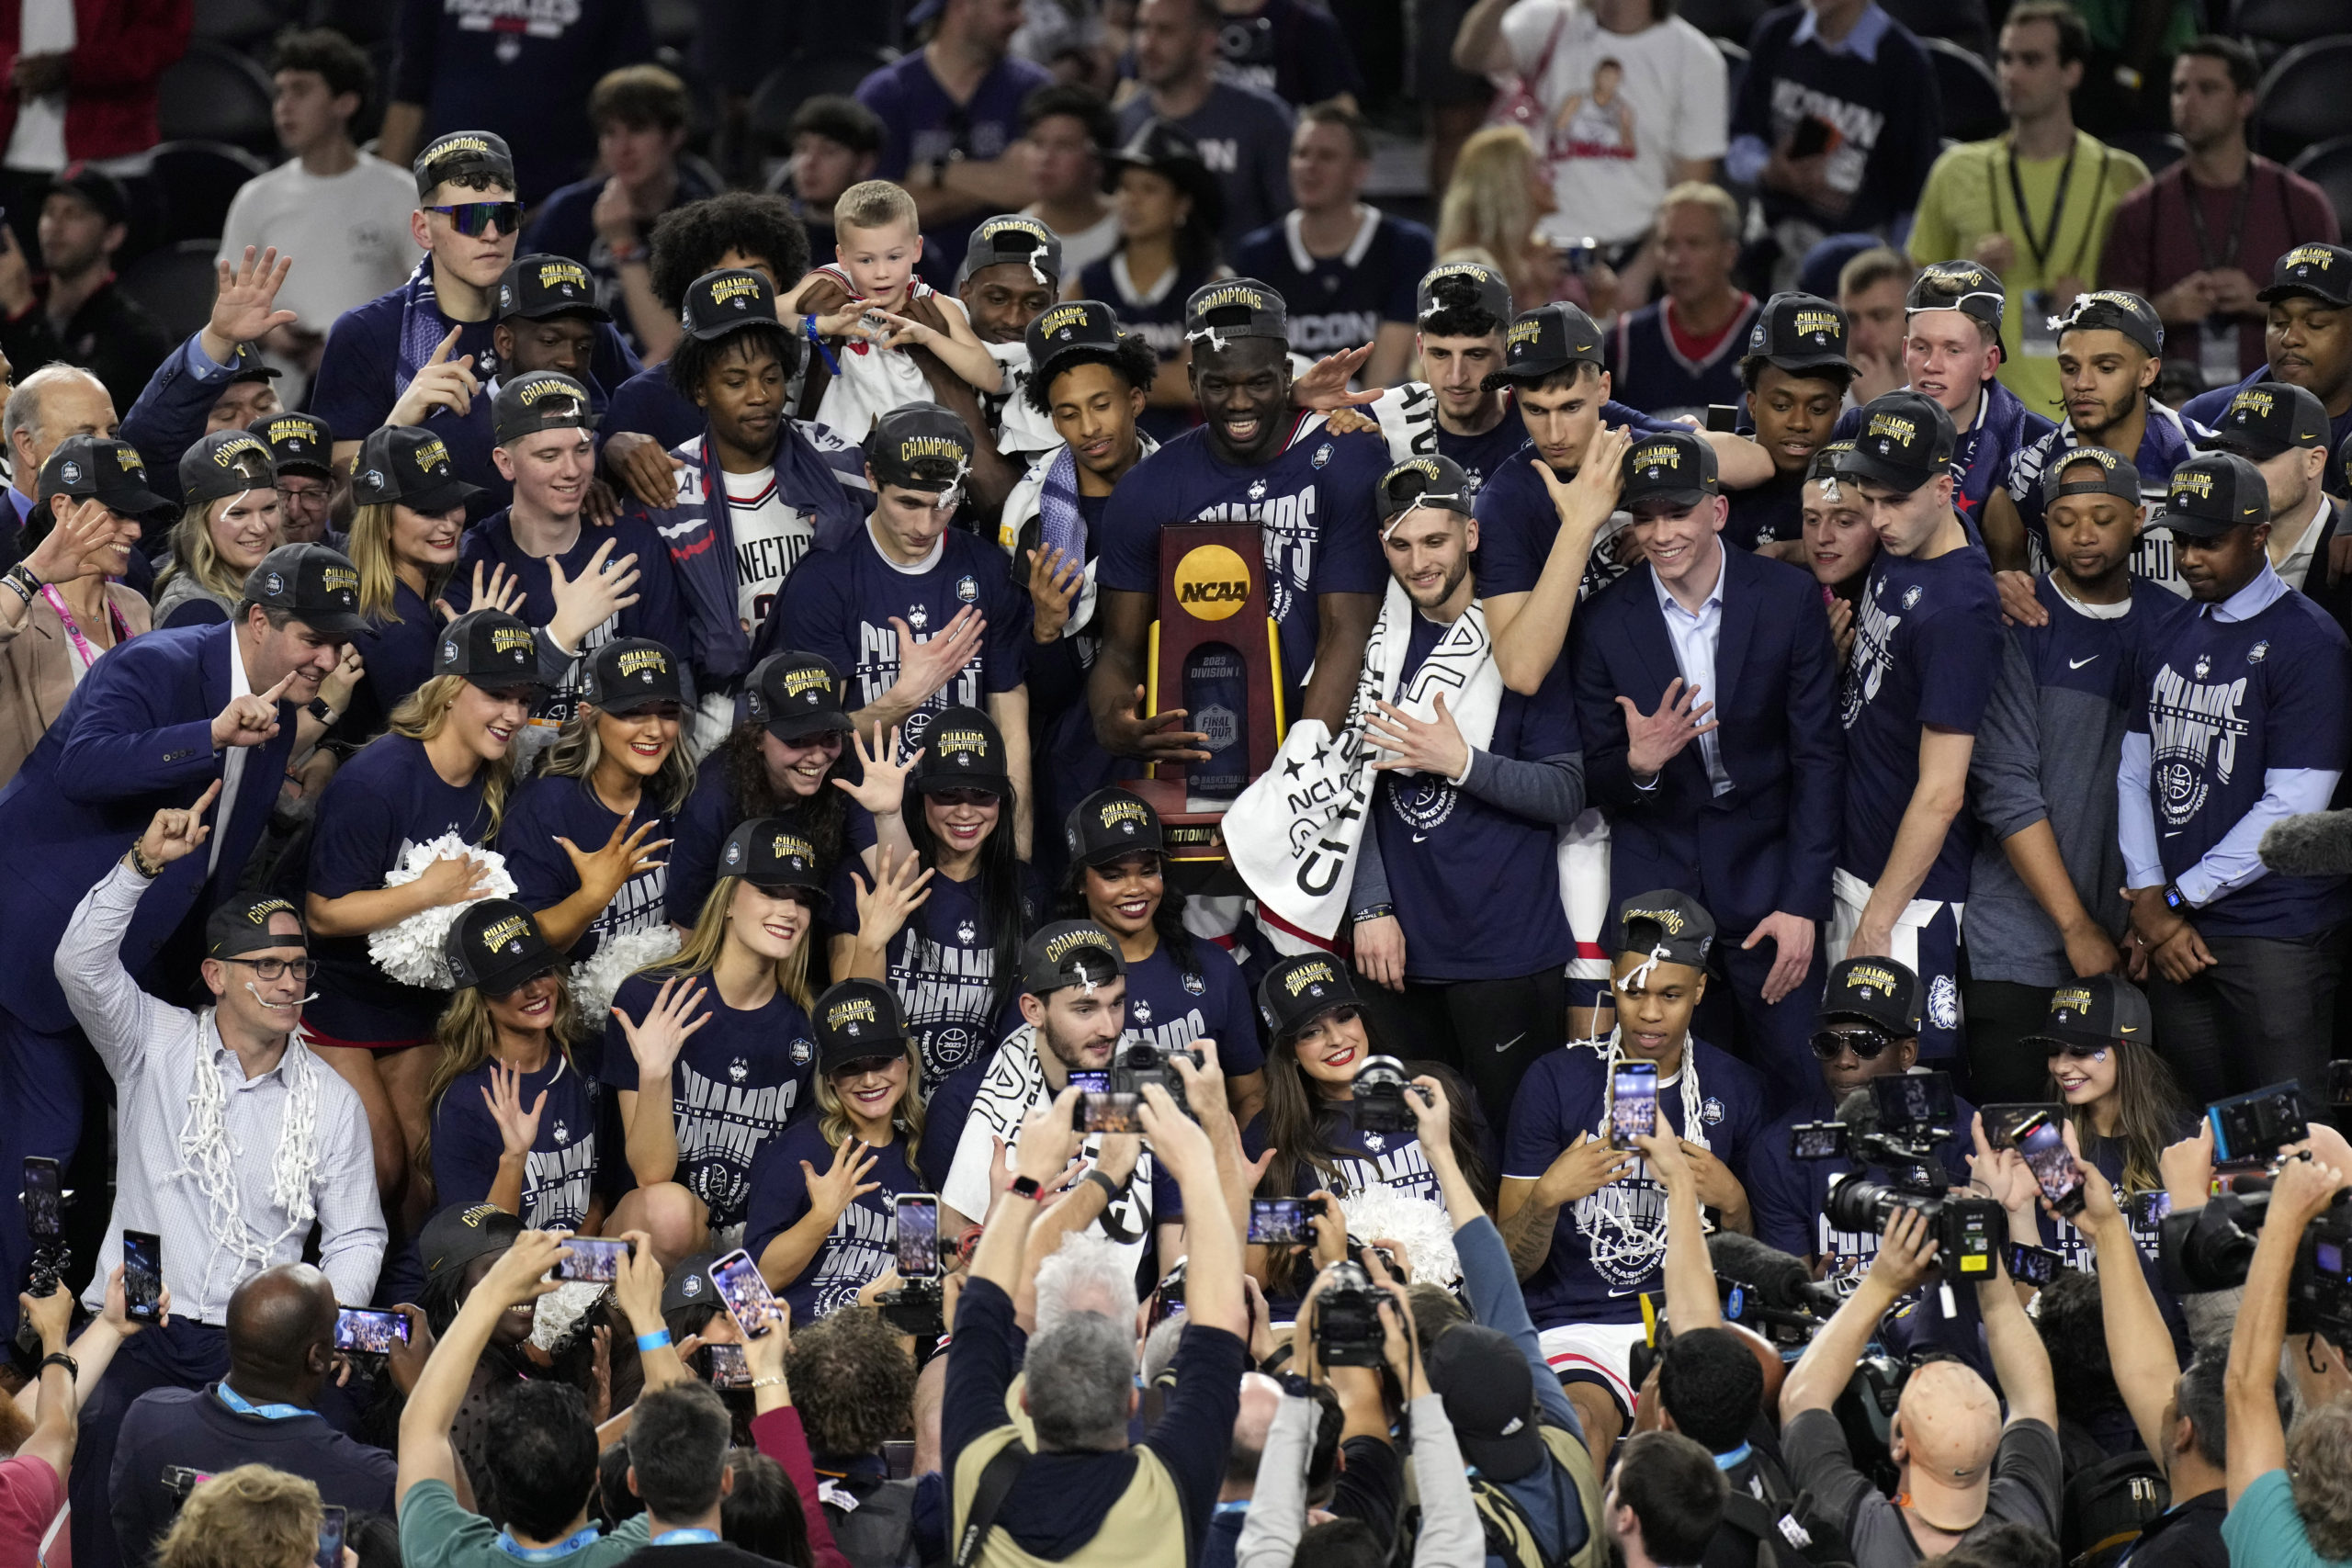 Players for UConn pose with coaches after winning the NCAA Tournament over San Diego State in Houston, Texas, on Monday night.